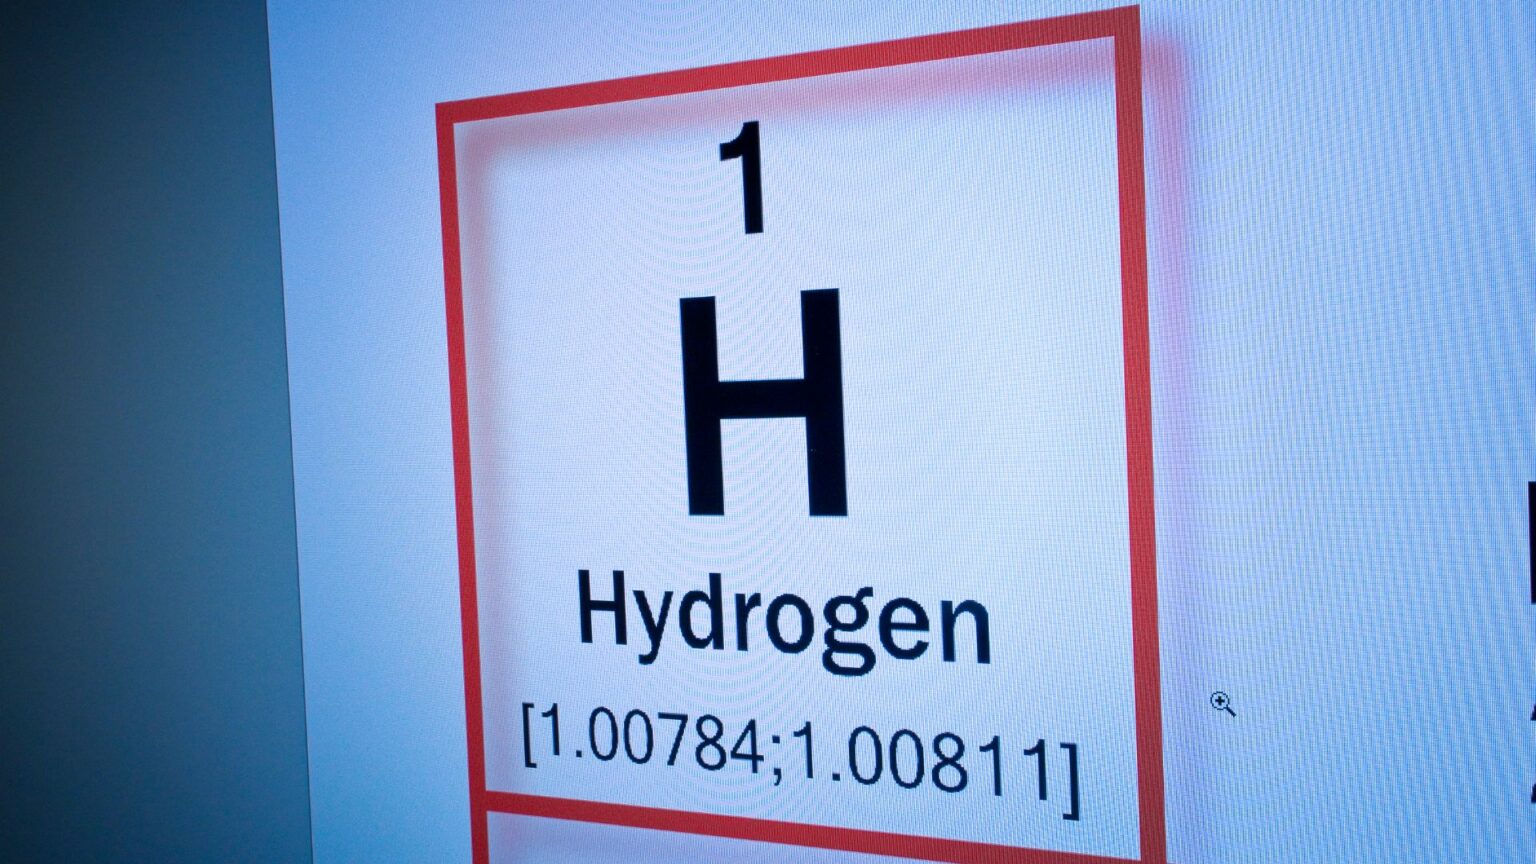 HZwo's Hydrogen Innovation Center (HIC) in Limbo Amid Budget Freeze